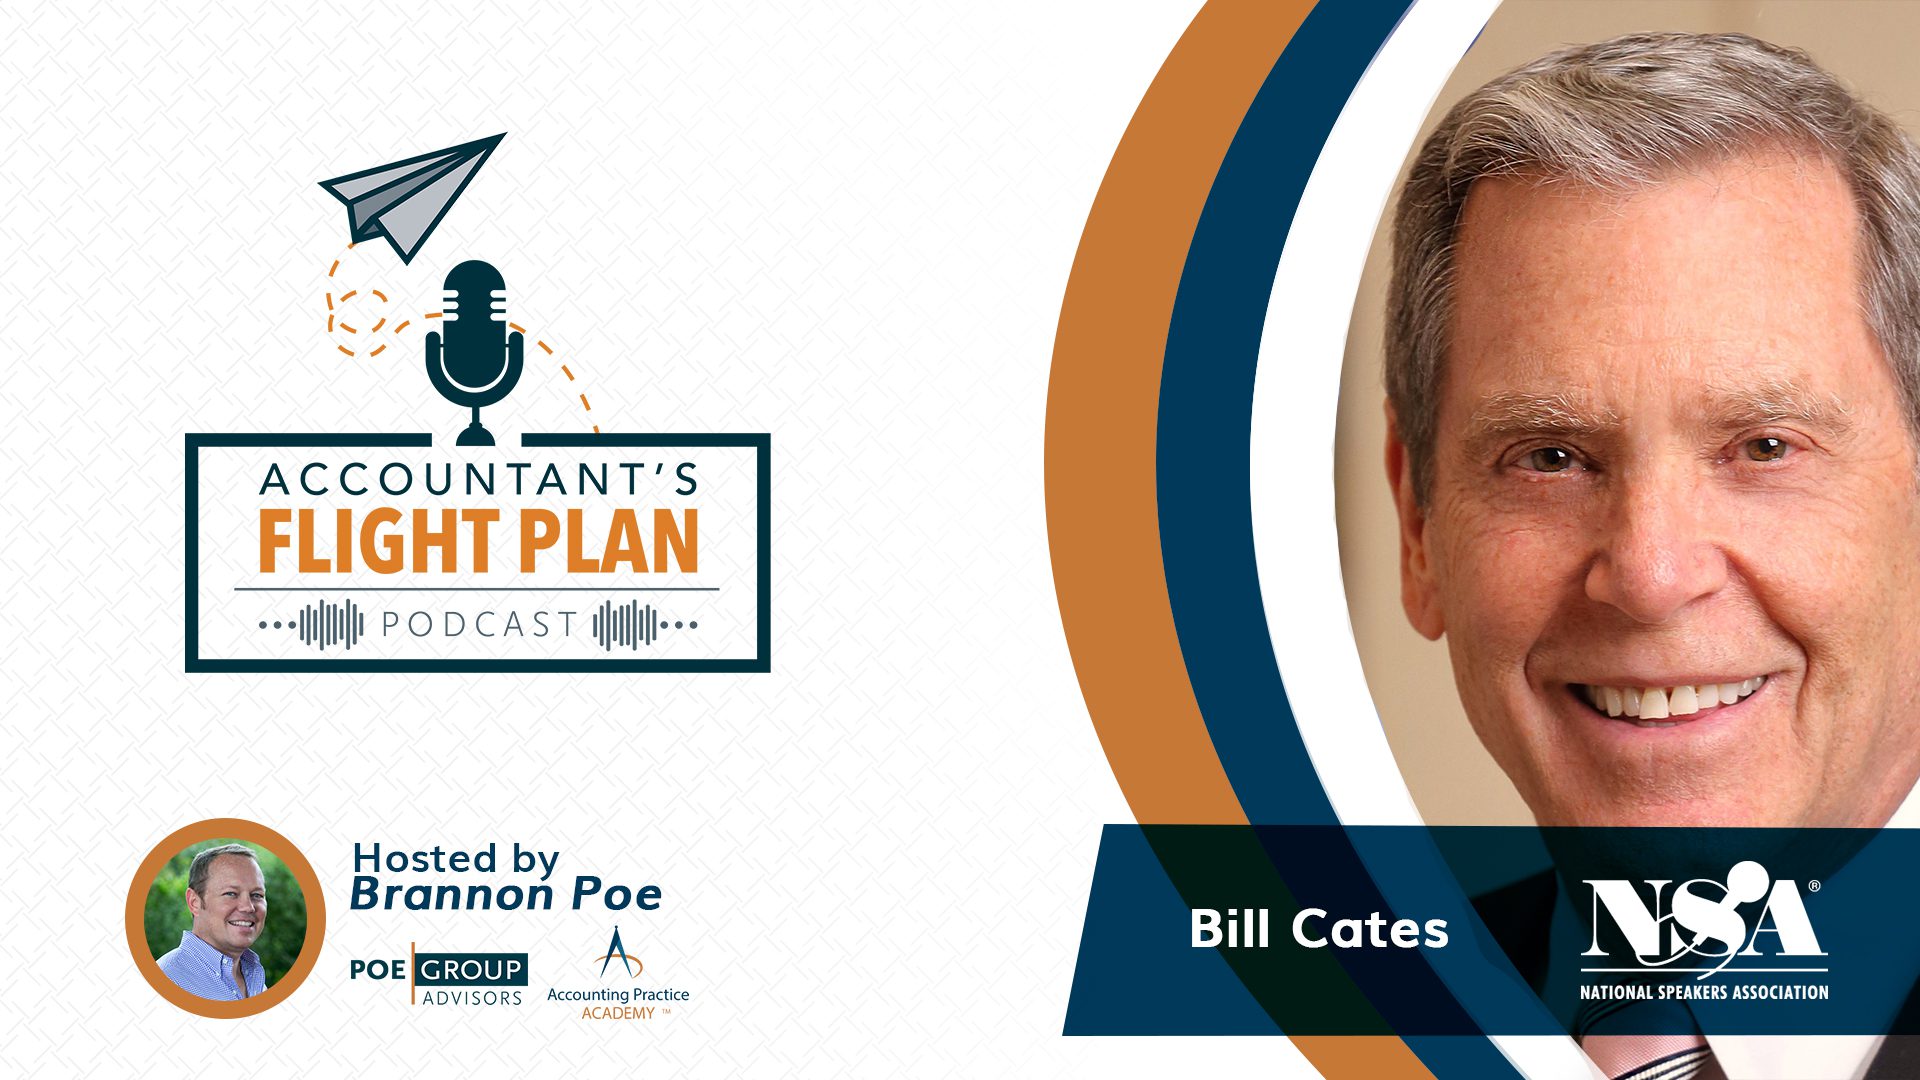 Accountant's Flight Plan podcast with guest, Bill Cates